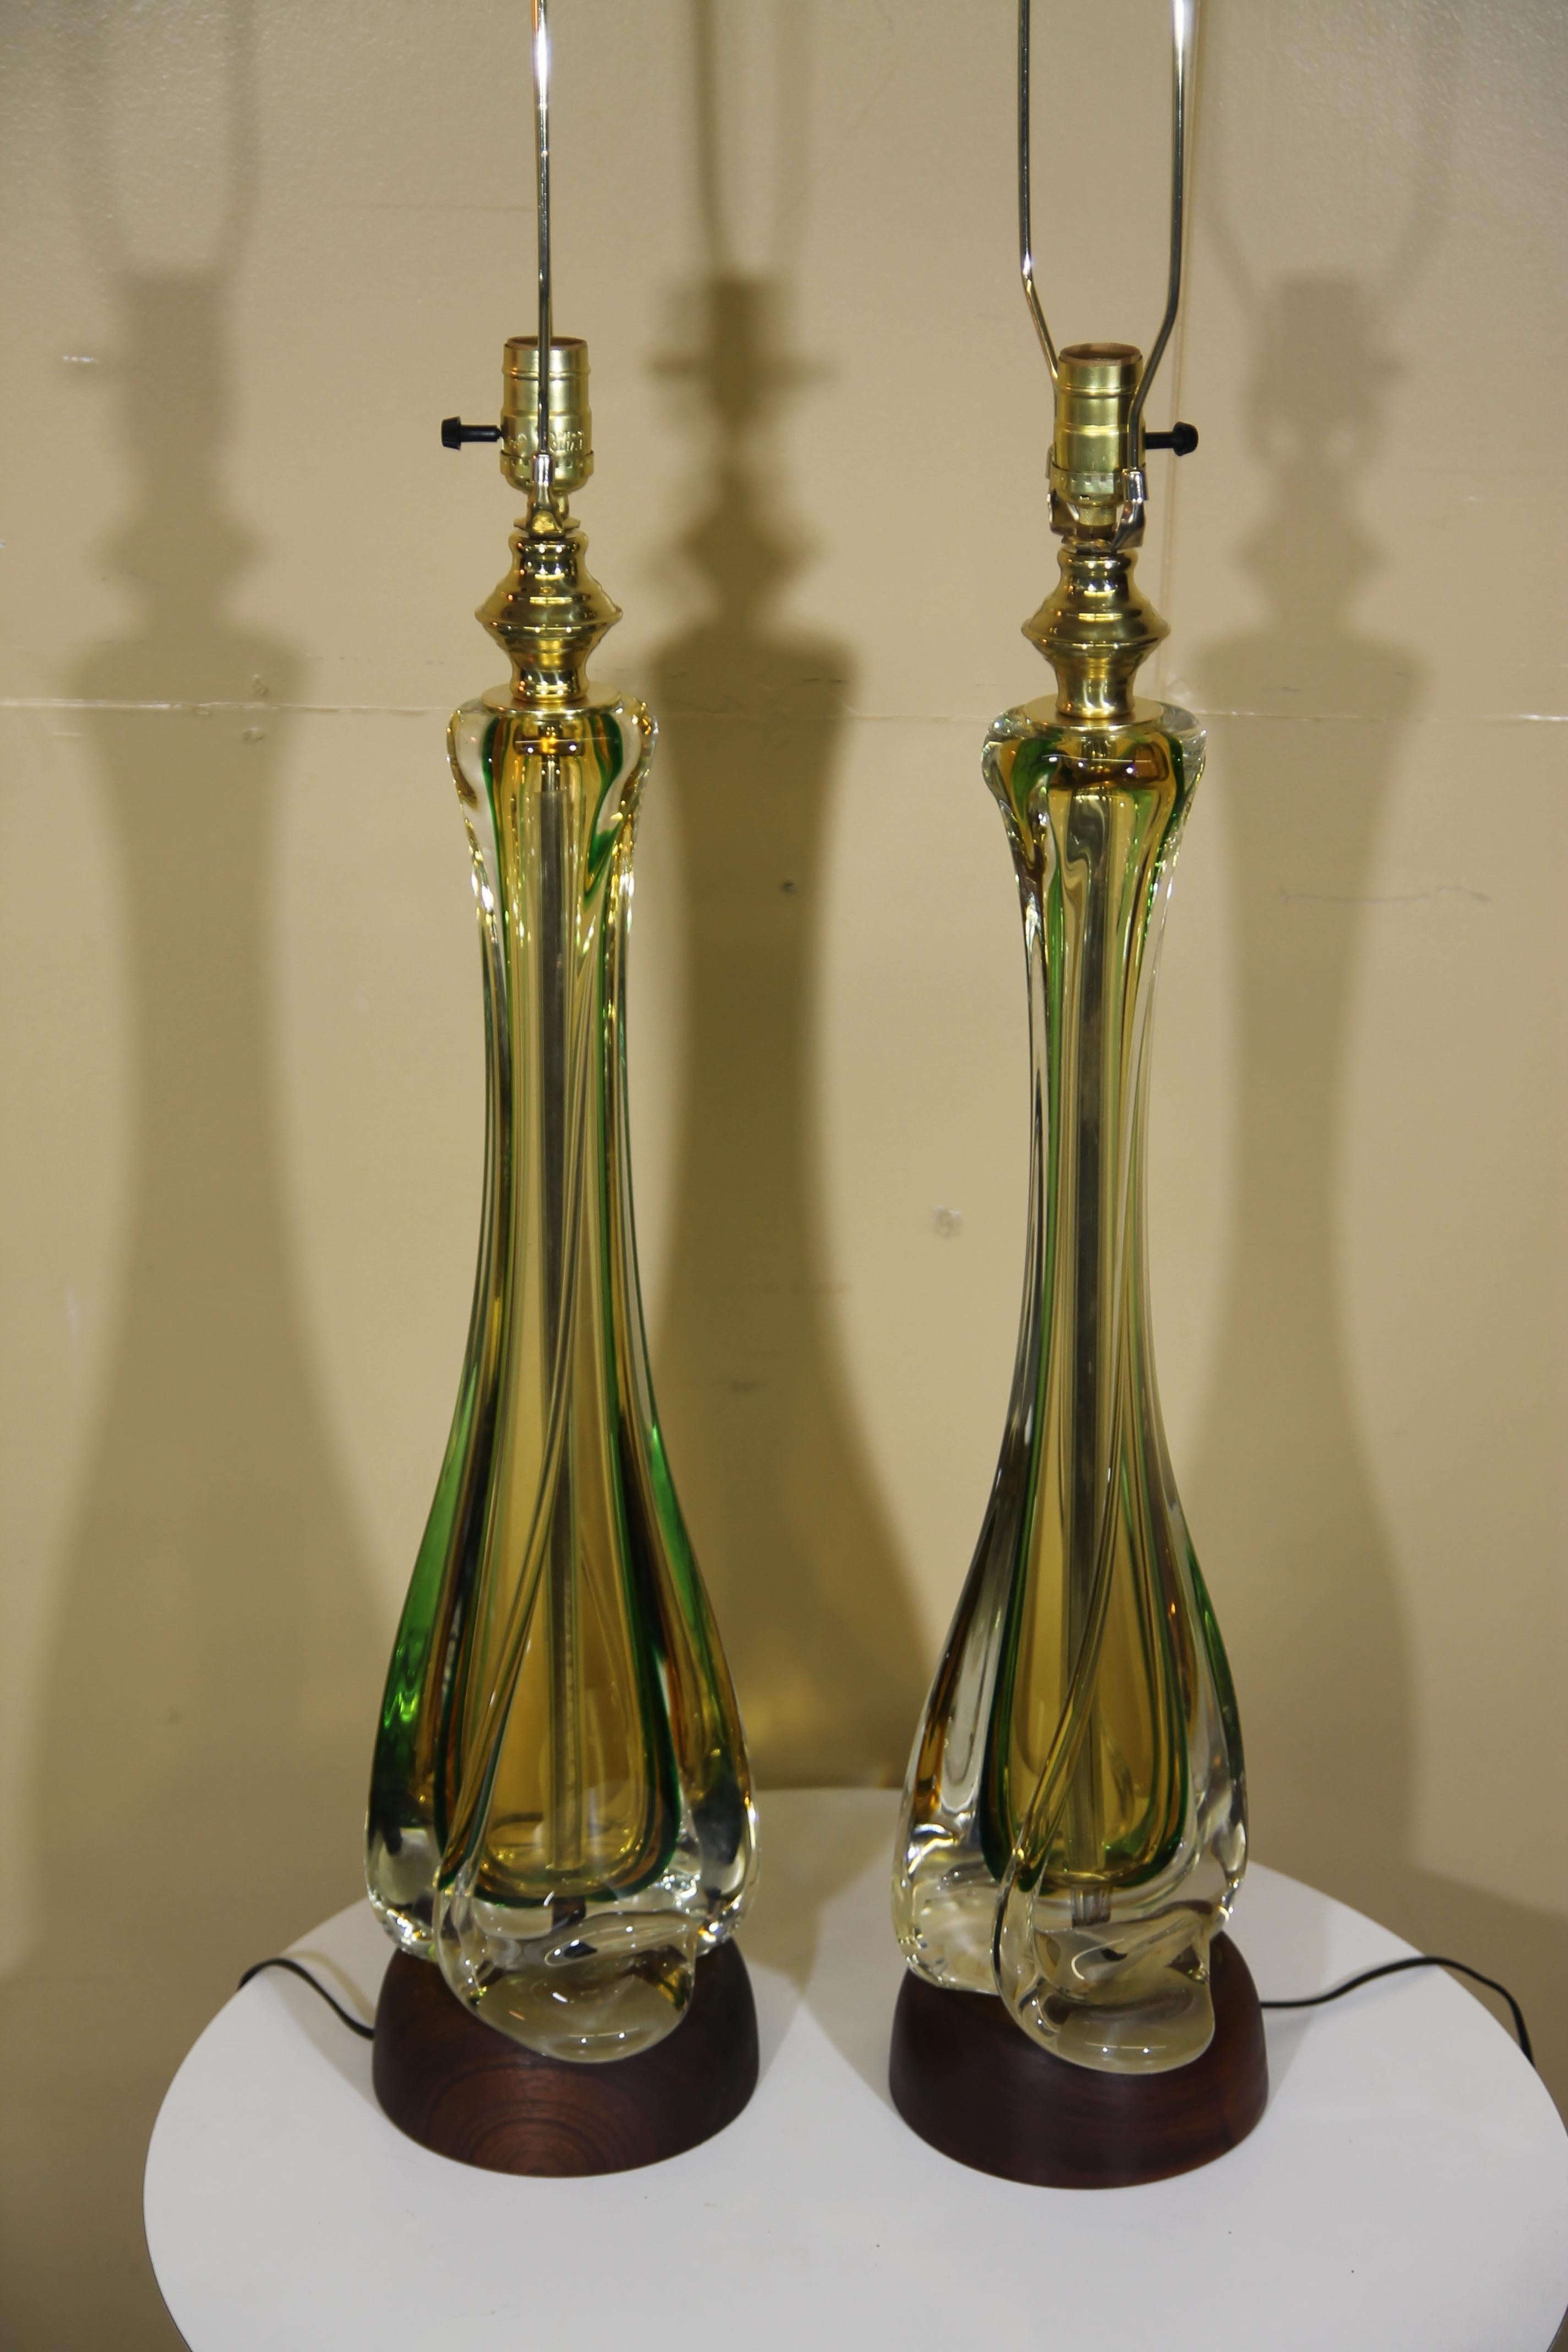 Great large format Murano glass Seguso designed table Lamps. The glass is a stunning mix of green, yellow and clear. Lamps have had the hardware replaced.